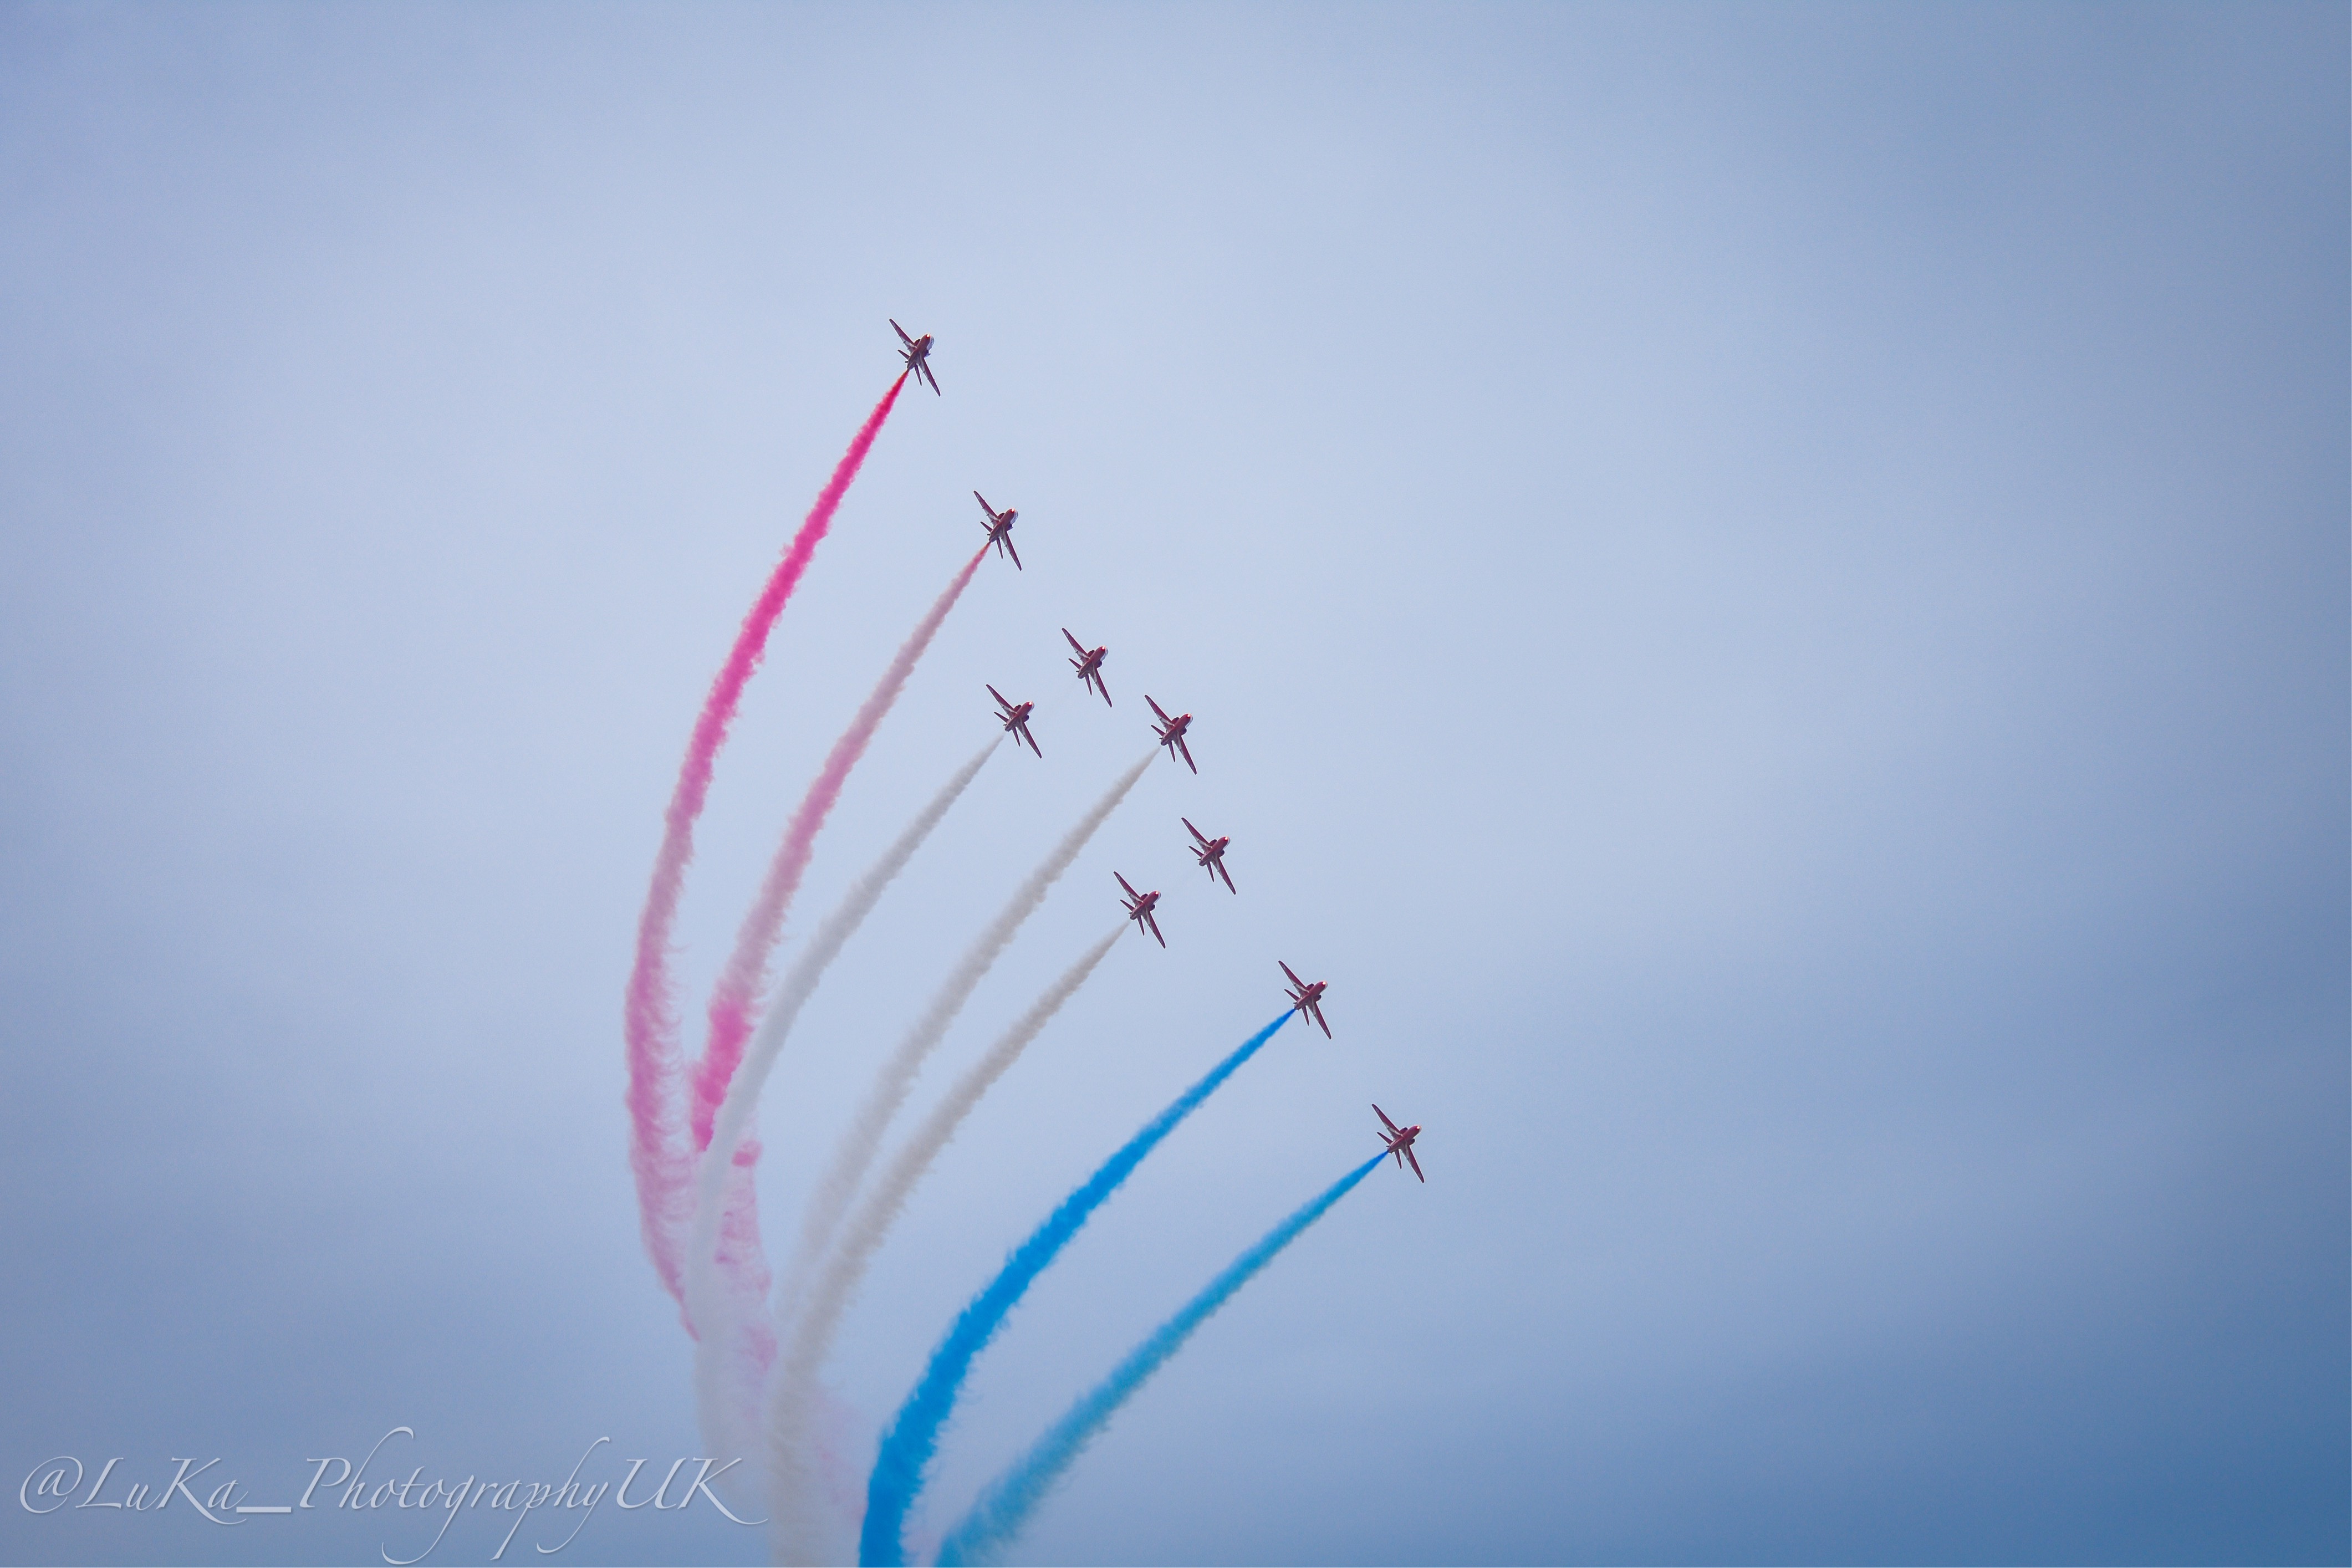 Red Arrows trailing smoke over Donna Nook.